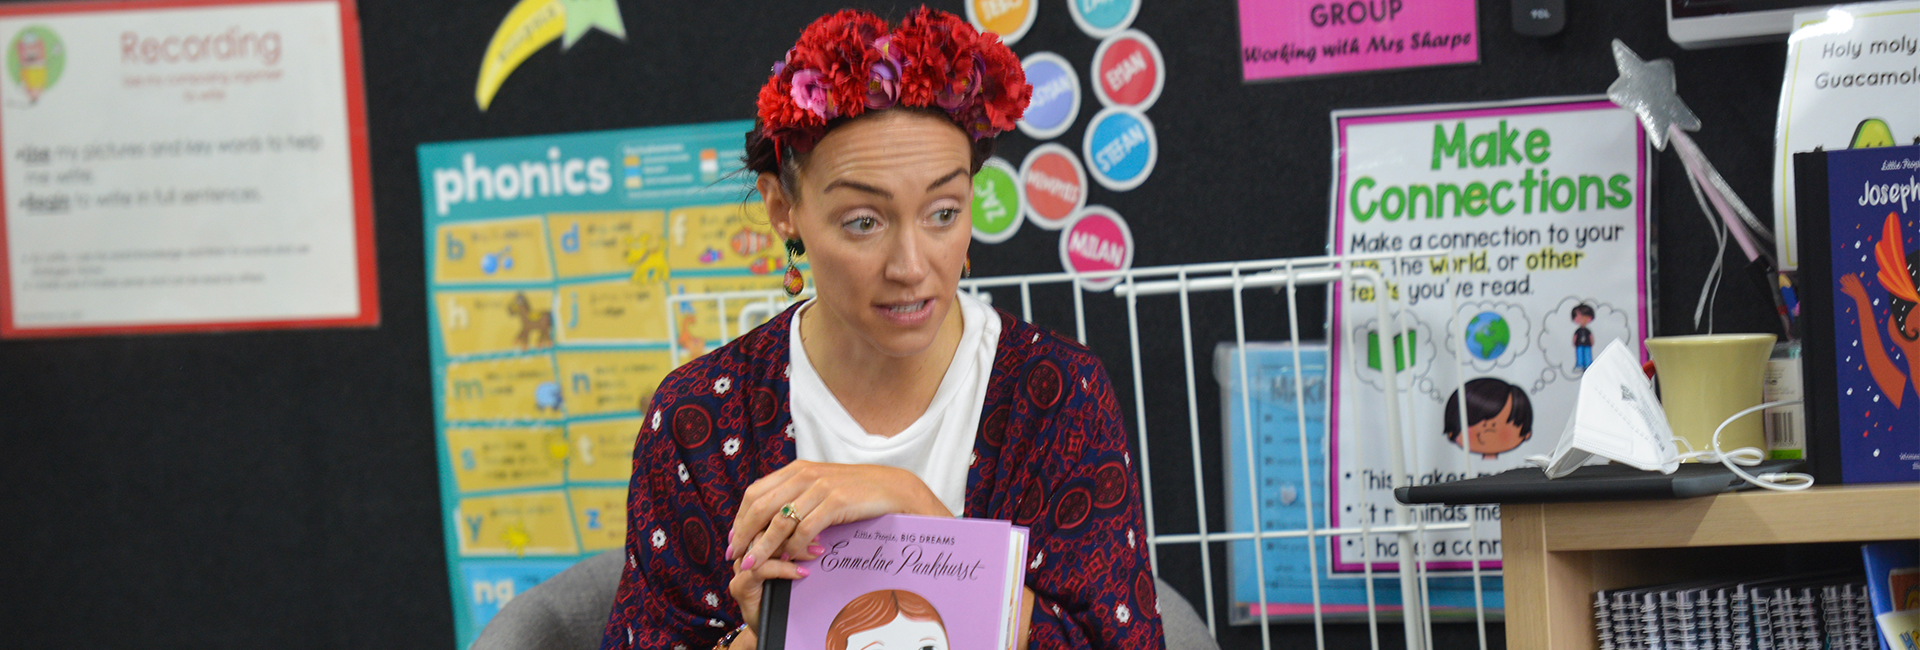 A Southern Cross Grammar teacher is dressed as Frida Kahlo. She has red flowers in her hair and is holding a book called Little People Big Dreams: Emmeline Pankhurst